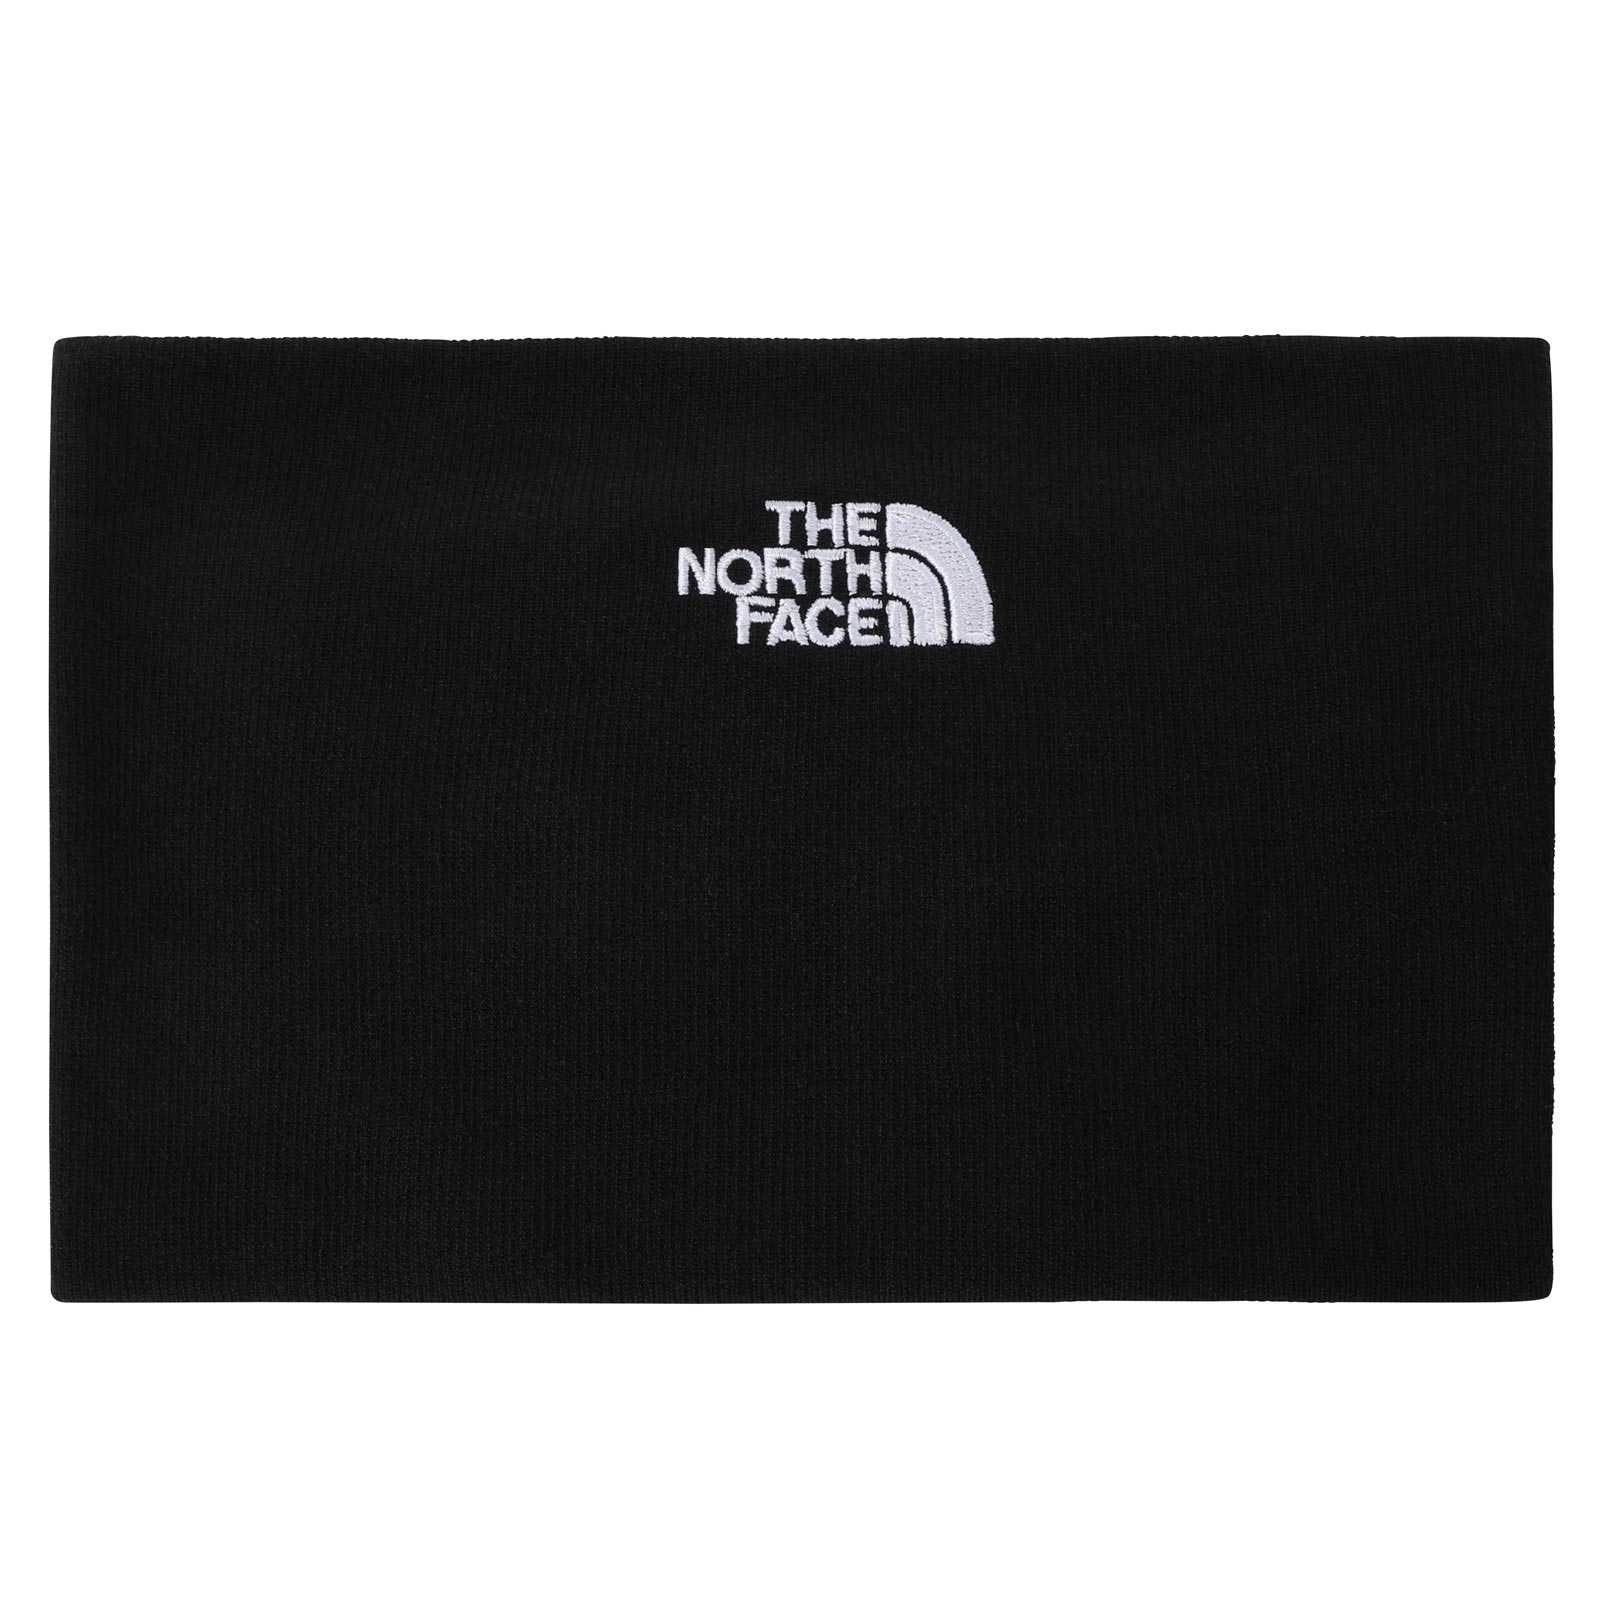 THE NORTH FACE WINTER SEAMLESS REVERSIBLE NECK WARMER